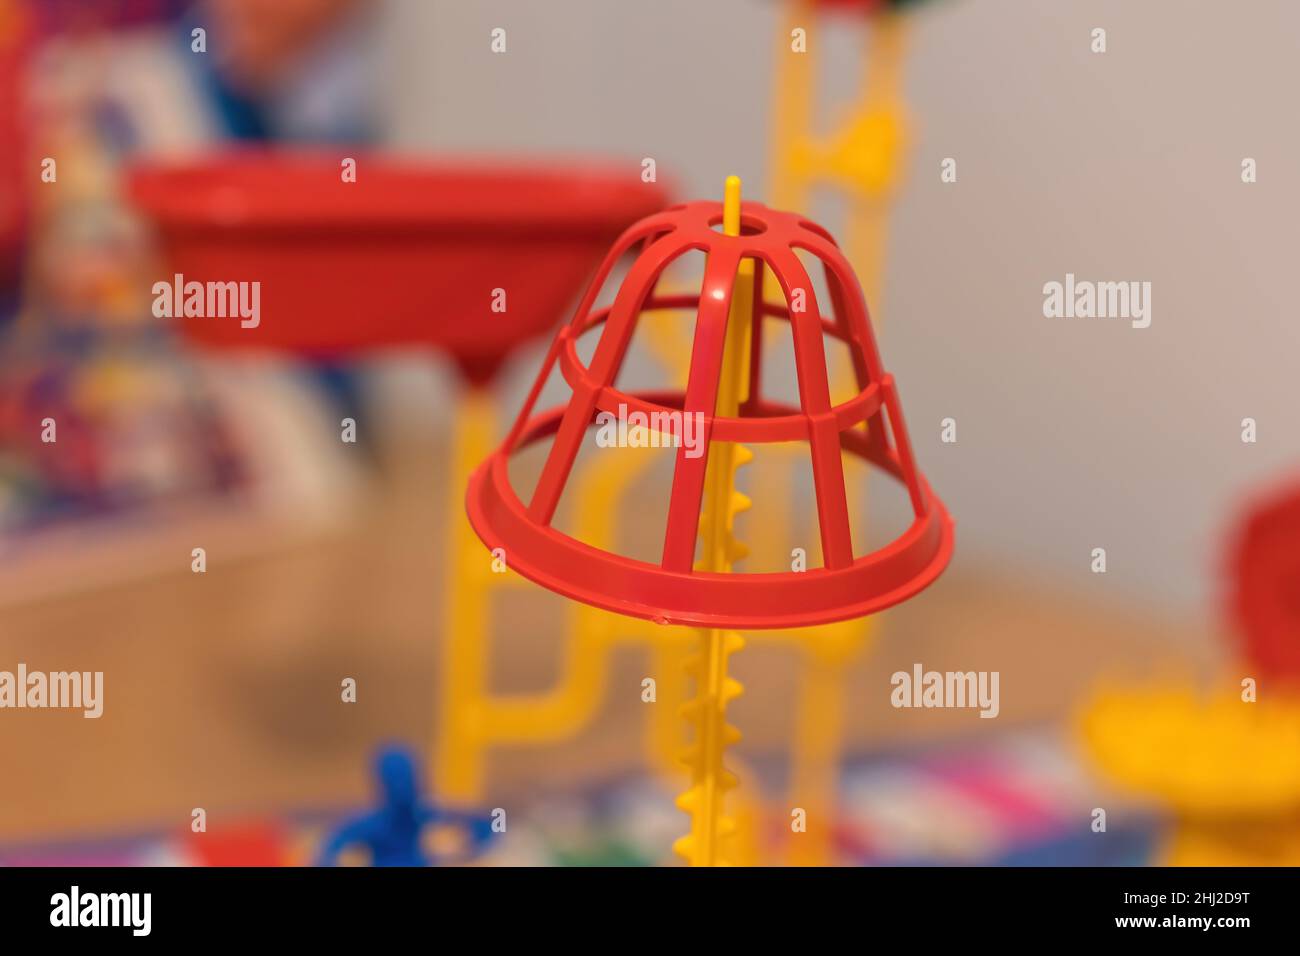 https://c8.alamy.com/comp/2HJ2D9T/a-close-up-view-of-the-red-basket-balanced-on-the-yellow-pole-of-the-mouse-trap-2HJ2D9T.jpg